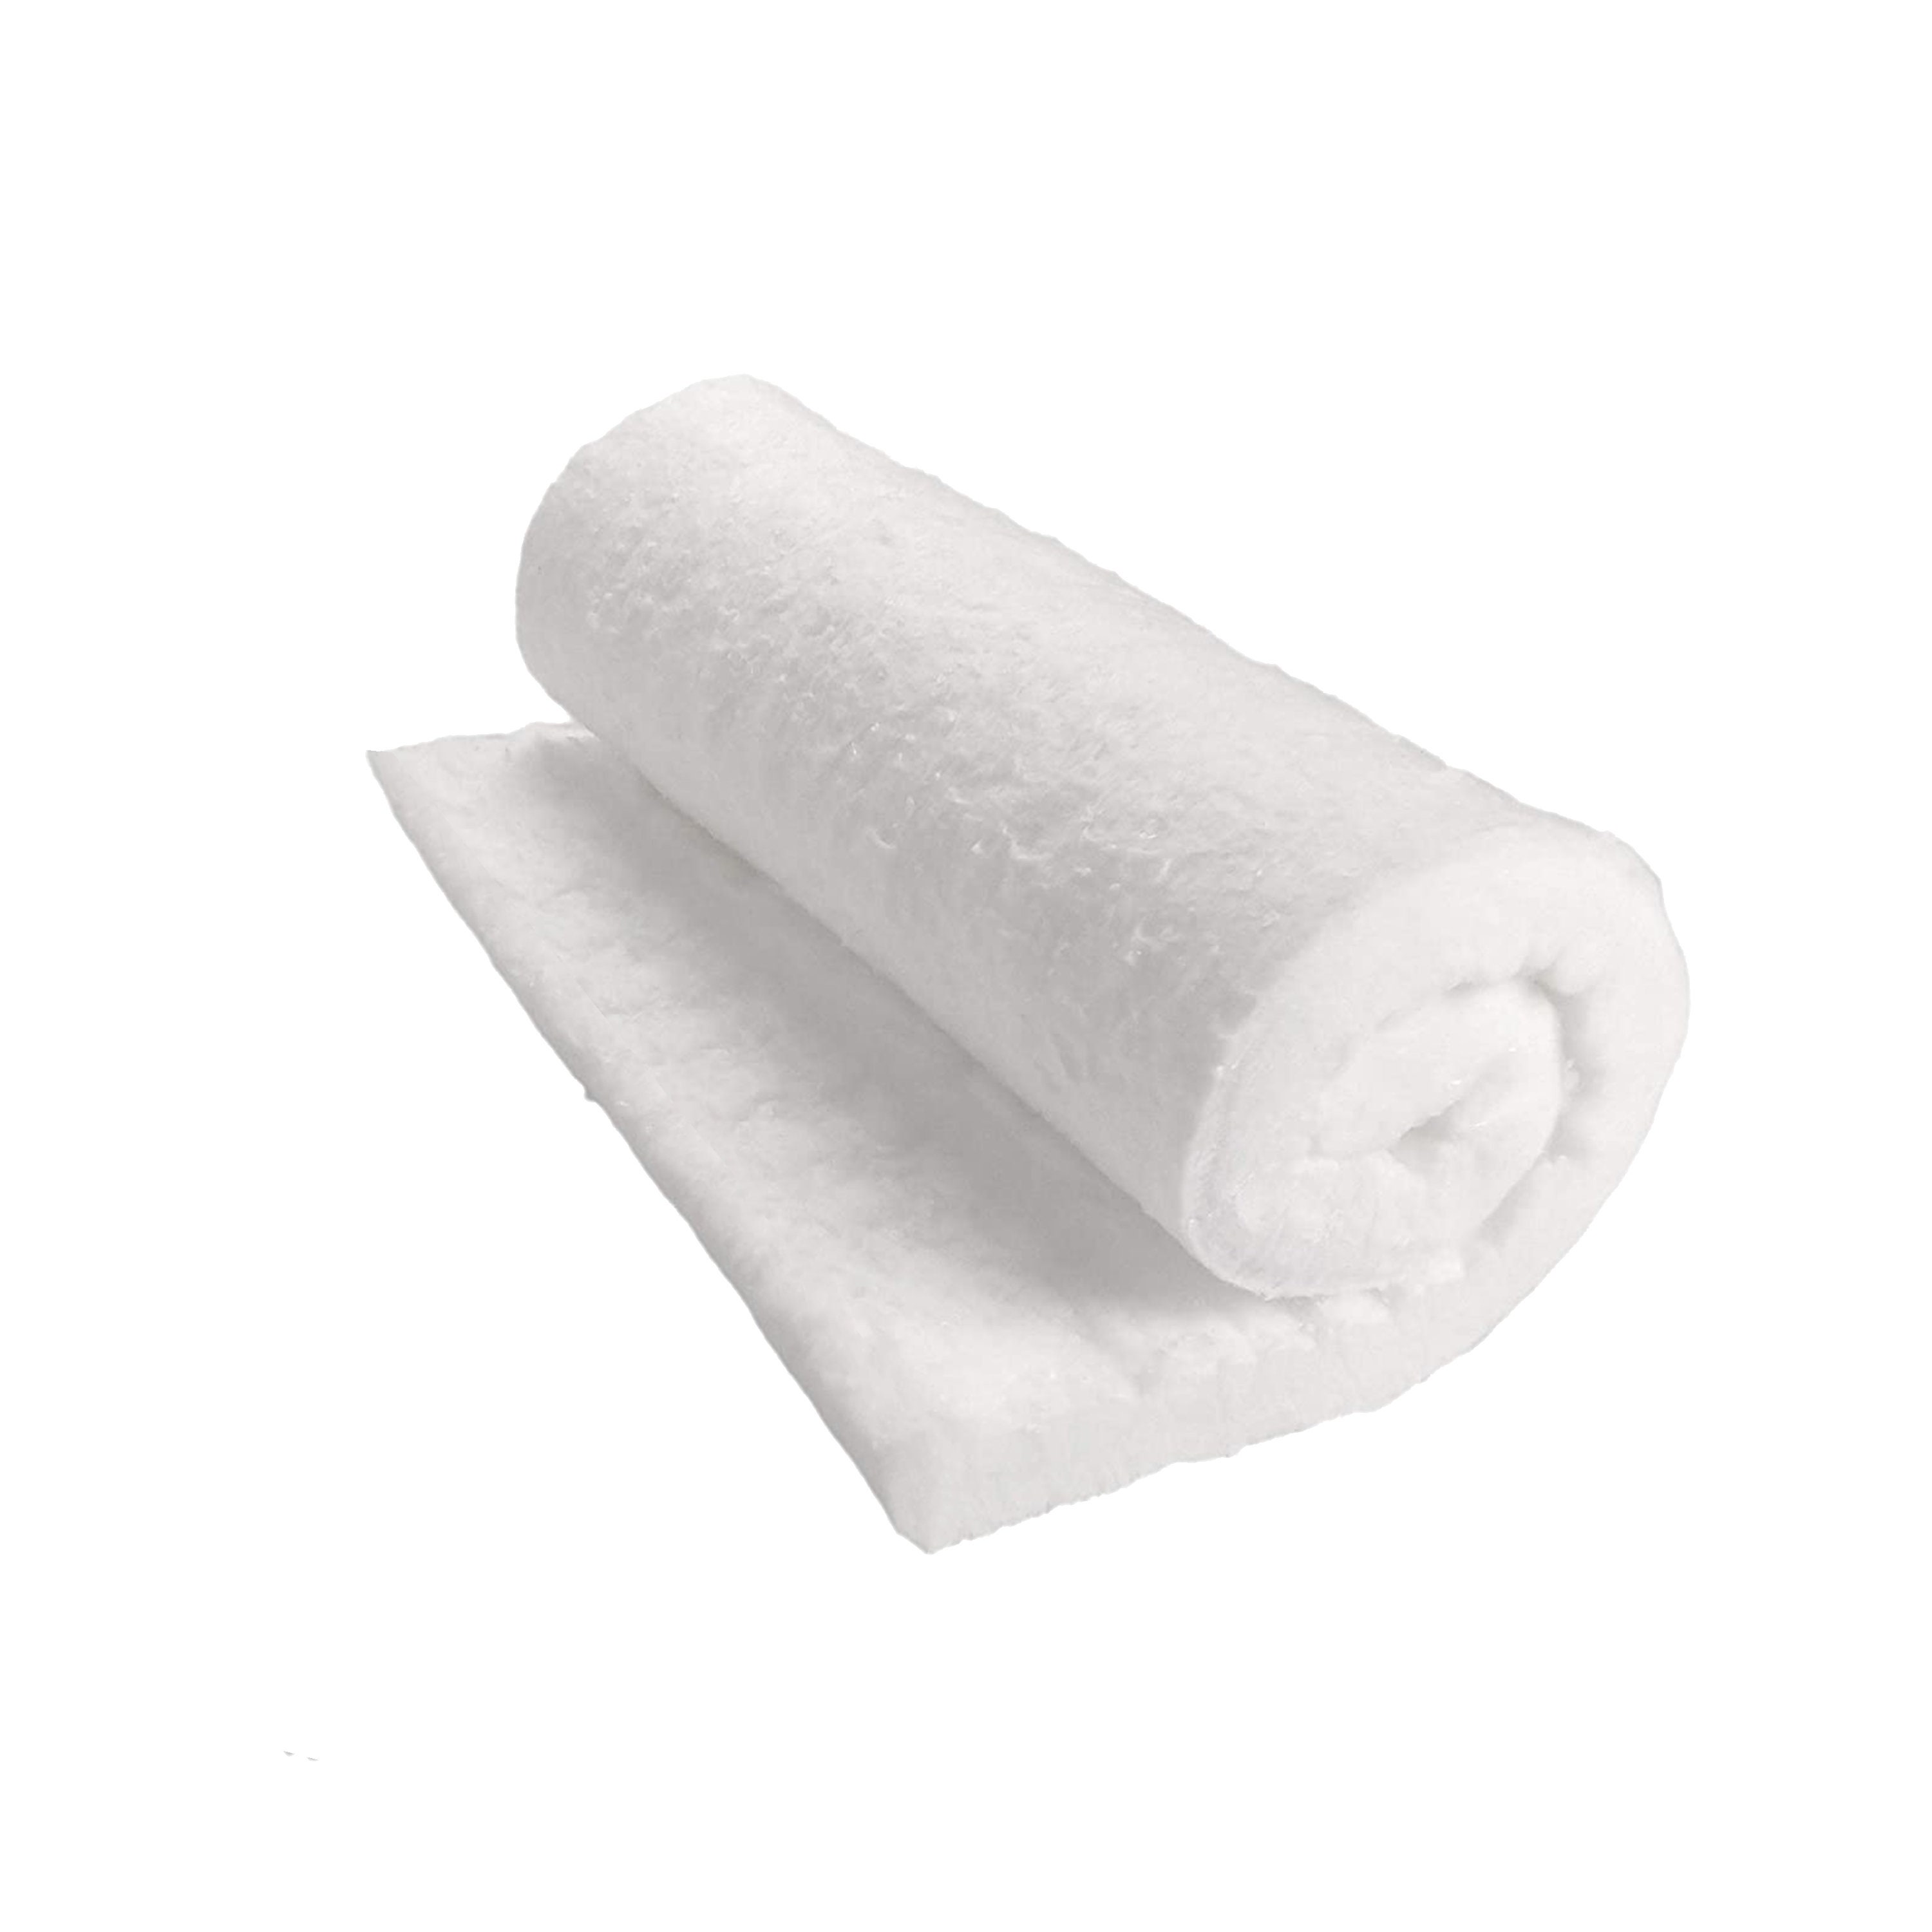 Ceramic Fiber Insulation Blanket Roll, 1 x 24 x 25', 2400F 8# Density,  Fireproof Insulation Blanket for Stove Forge Oven Foundry Furnace Chimney